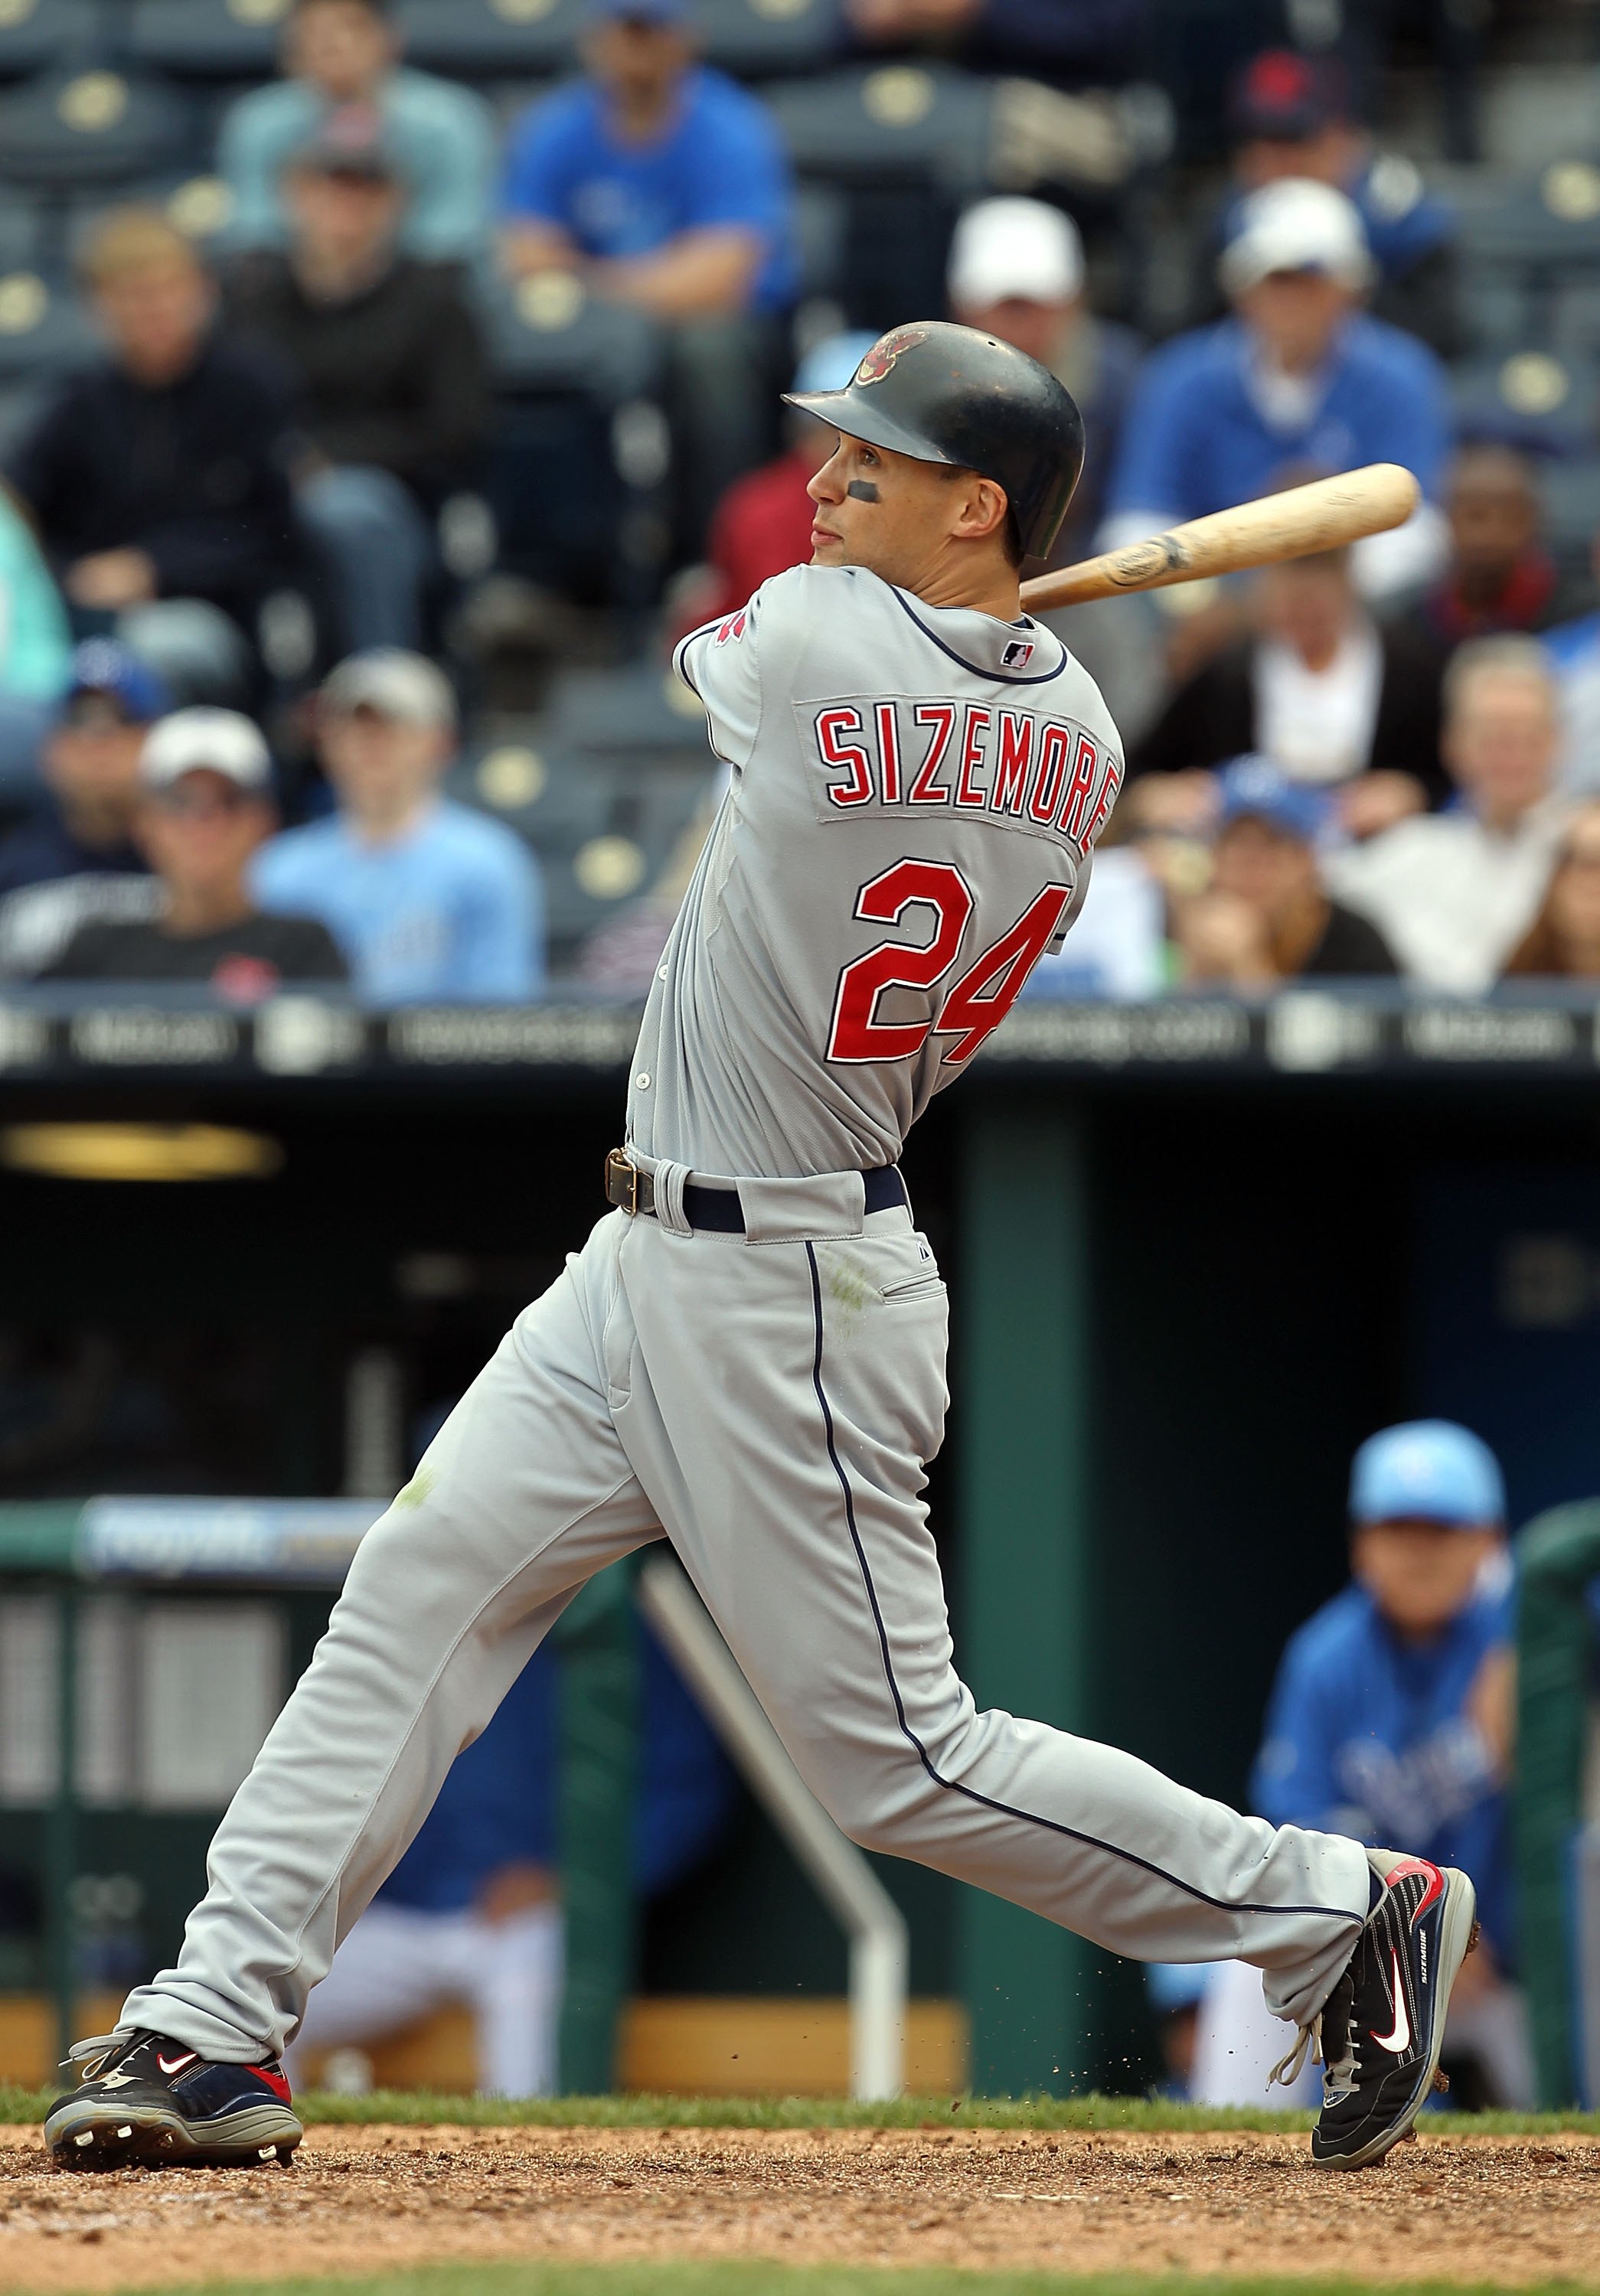 Grady Sizemore on knee injury: There's a lot of concern - NBC Sports